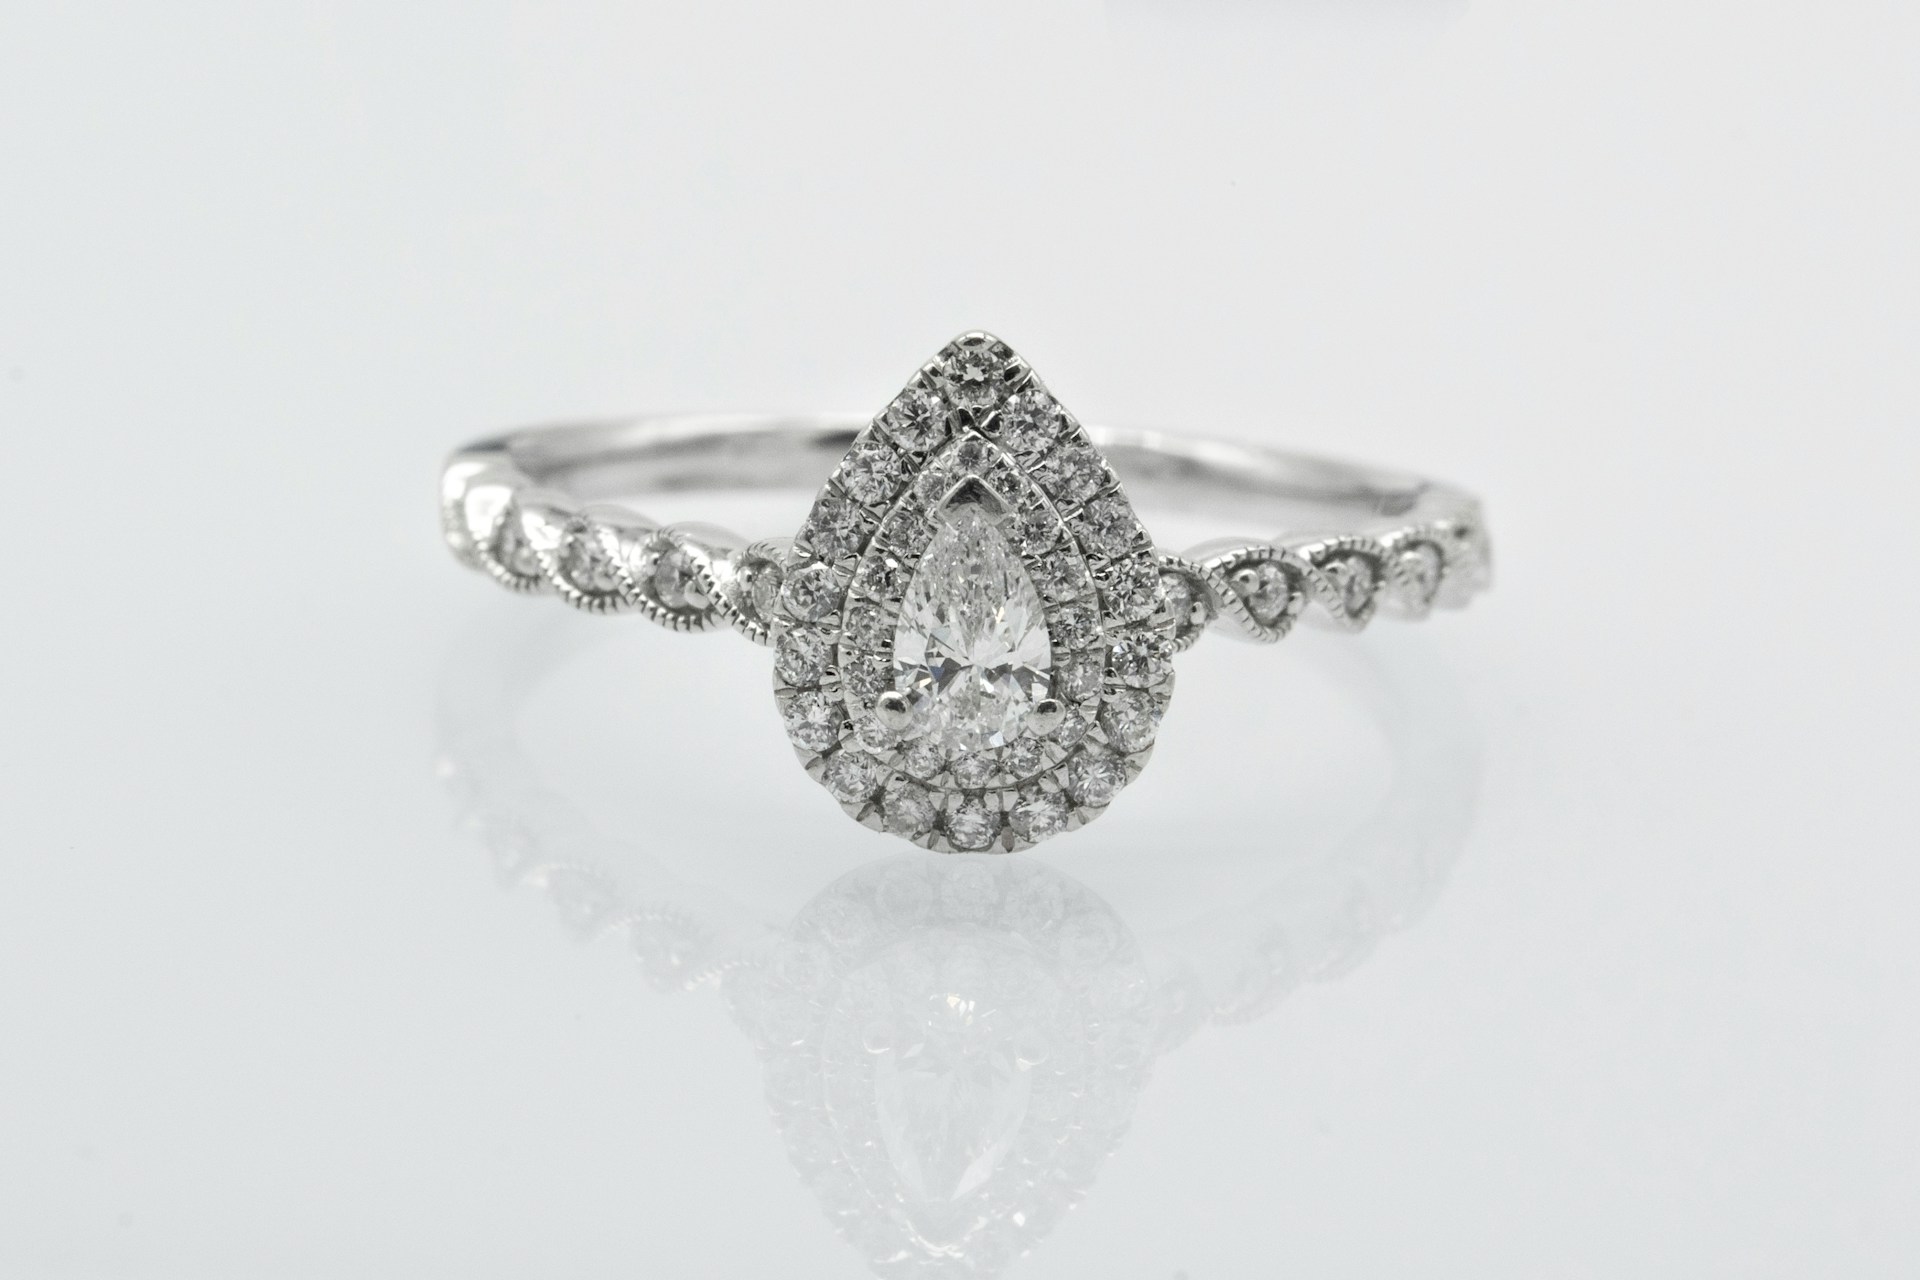 a white gold engagement ring with a pear shape center stone and halo setting